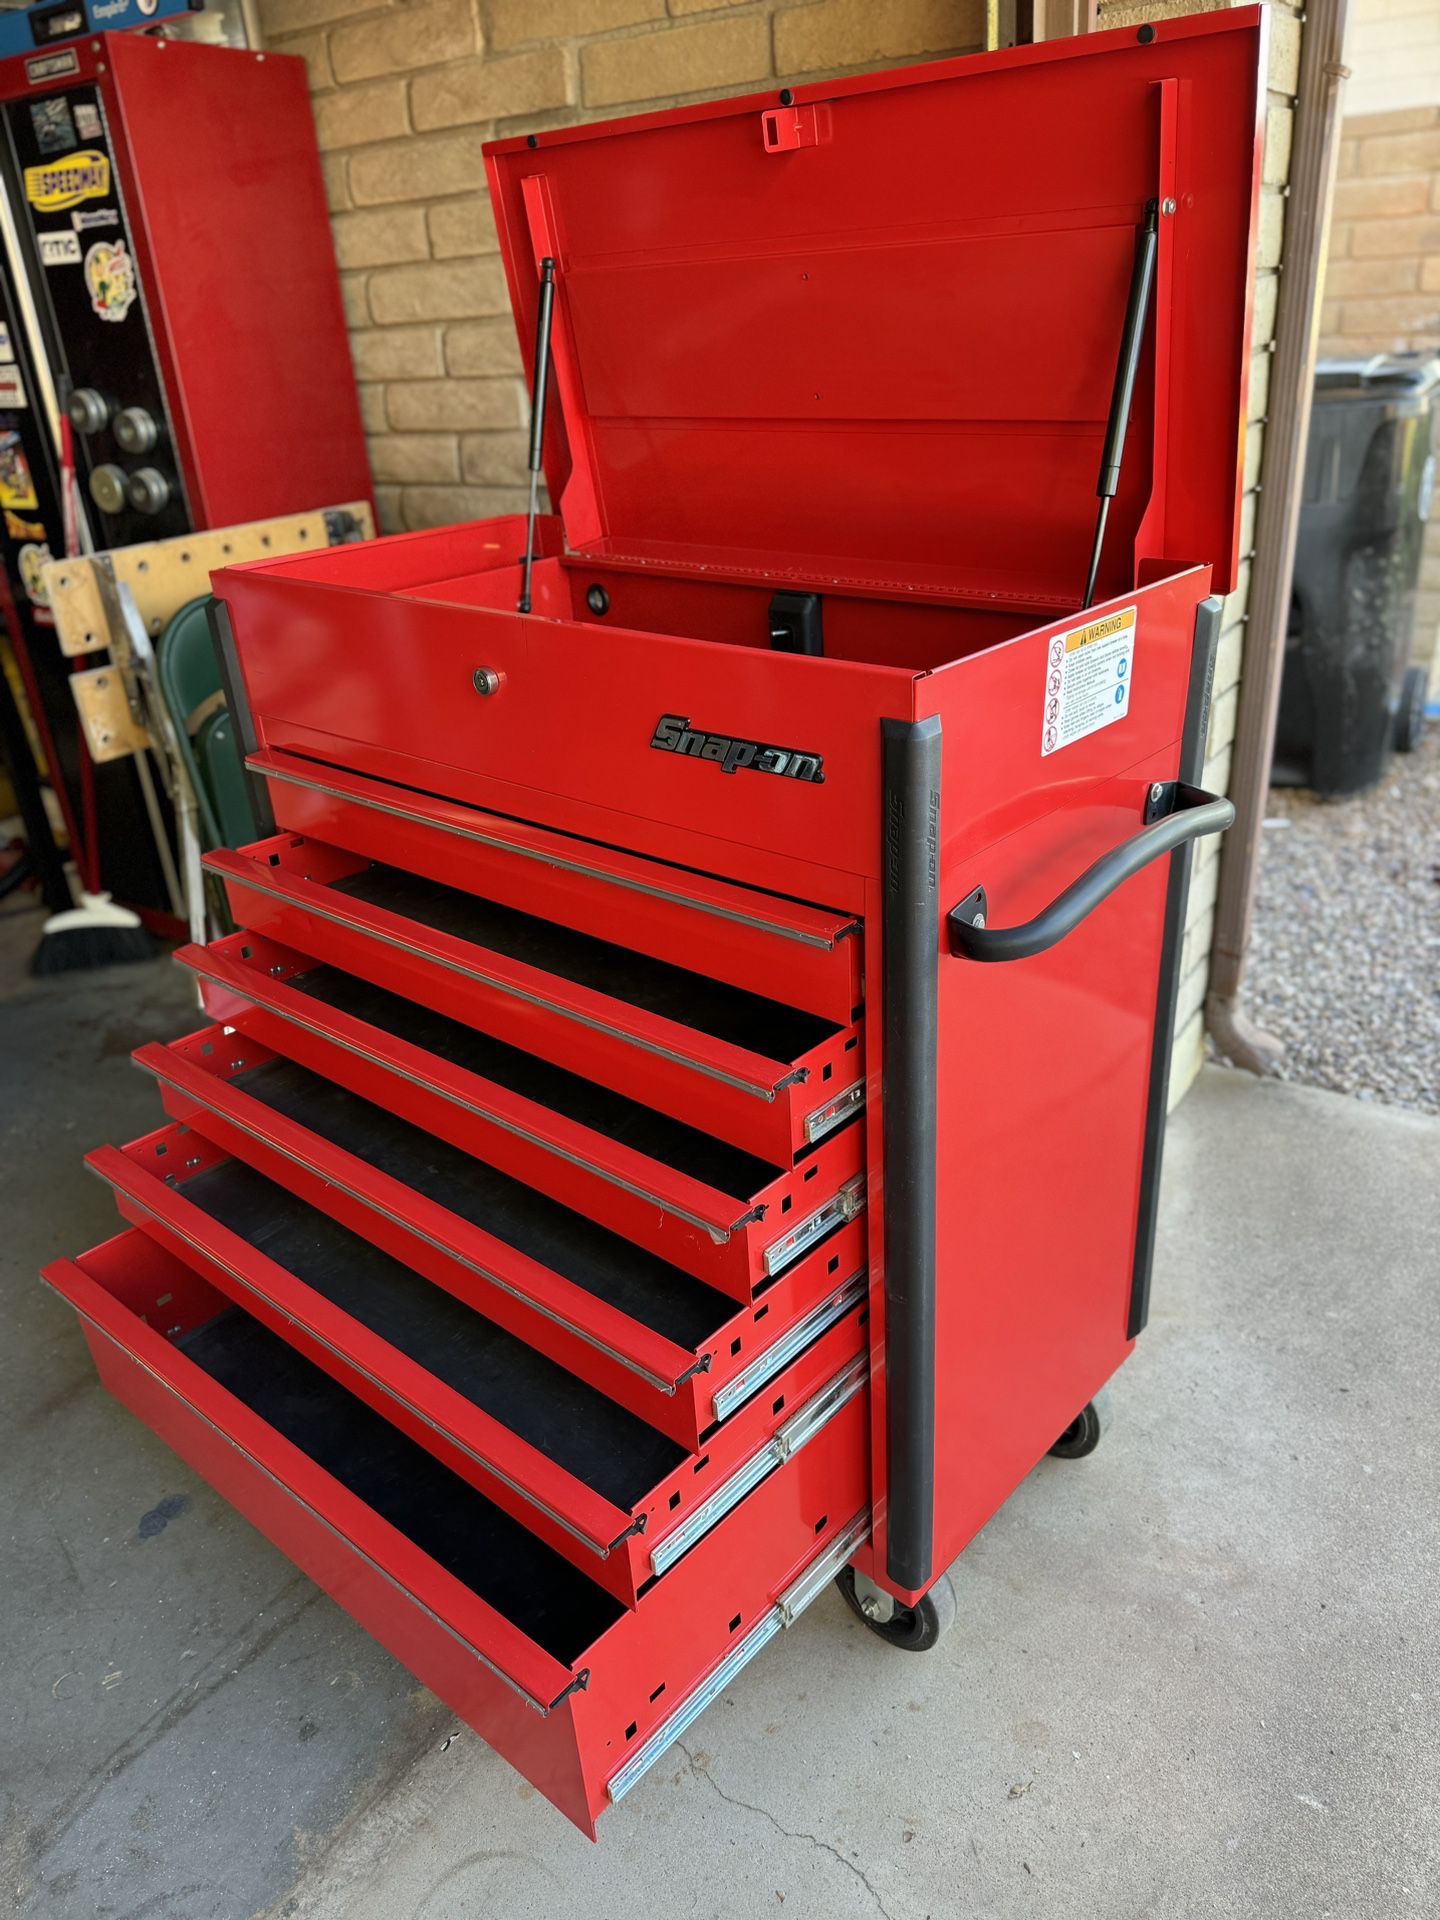 Snap On Tool Box With Key